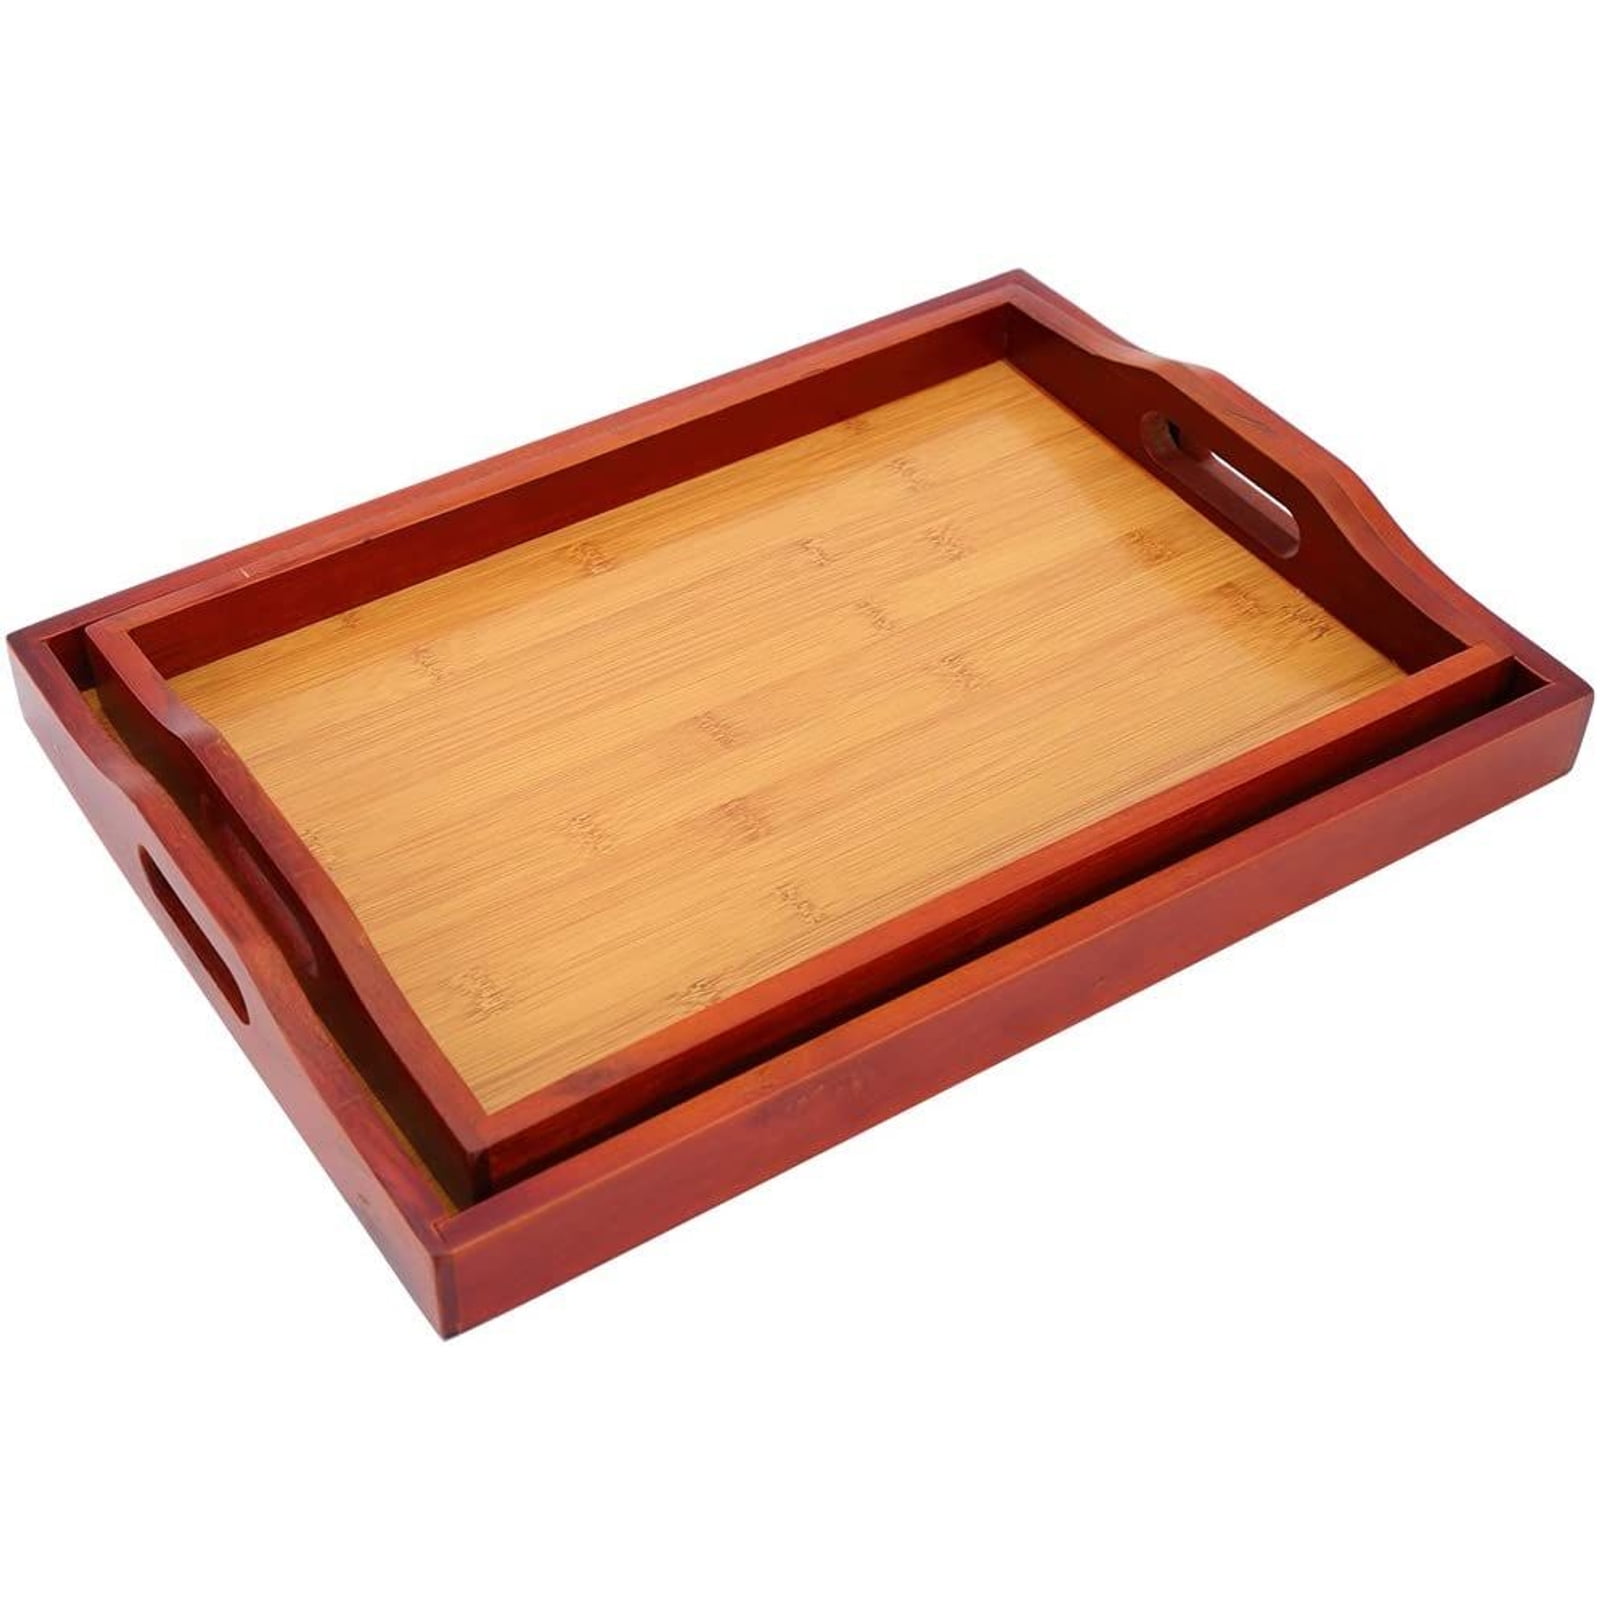 wooden serving tray country tray wood breakfast tray cocoa serving tray coffee table tray wood tray with handles wood tray rectangular